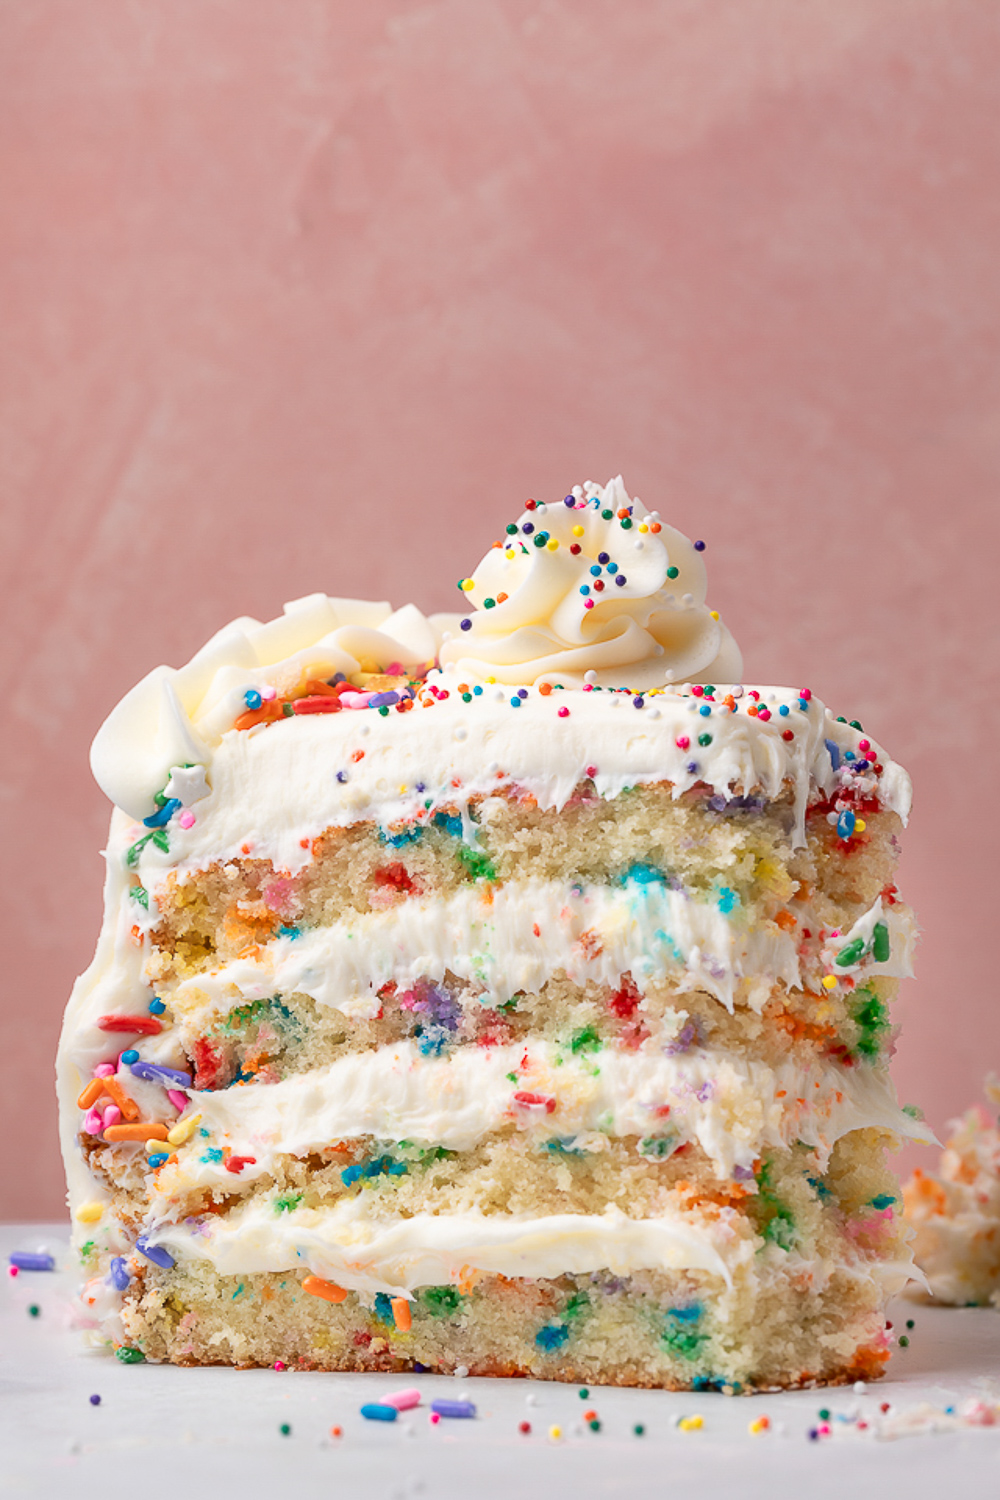 Have a Birthday Party Coming Up? Check Out These Homemade Birthday Cake  Ideas!